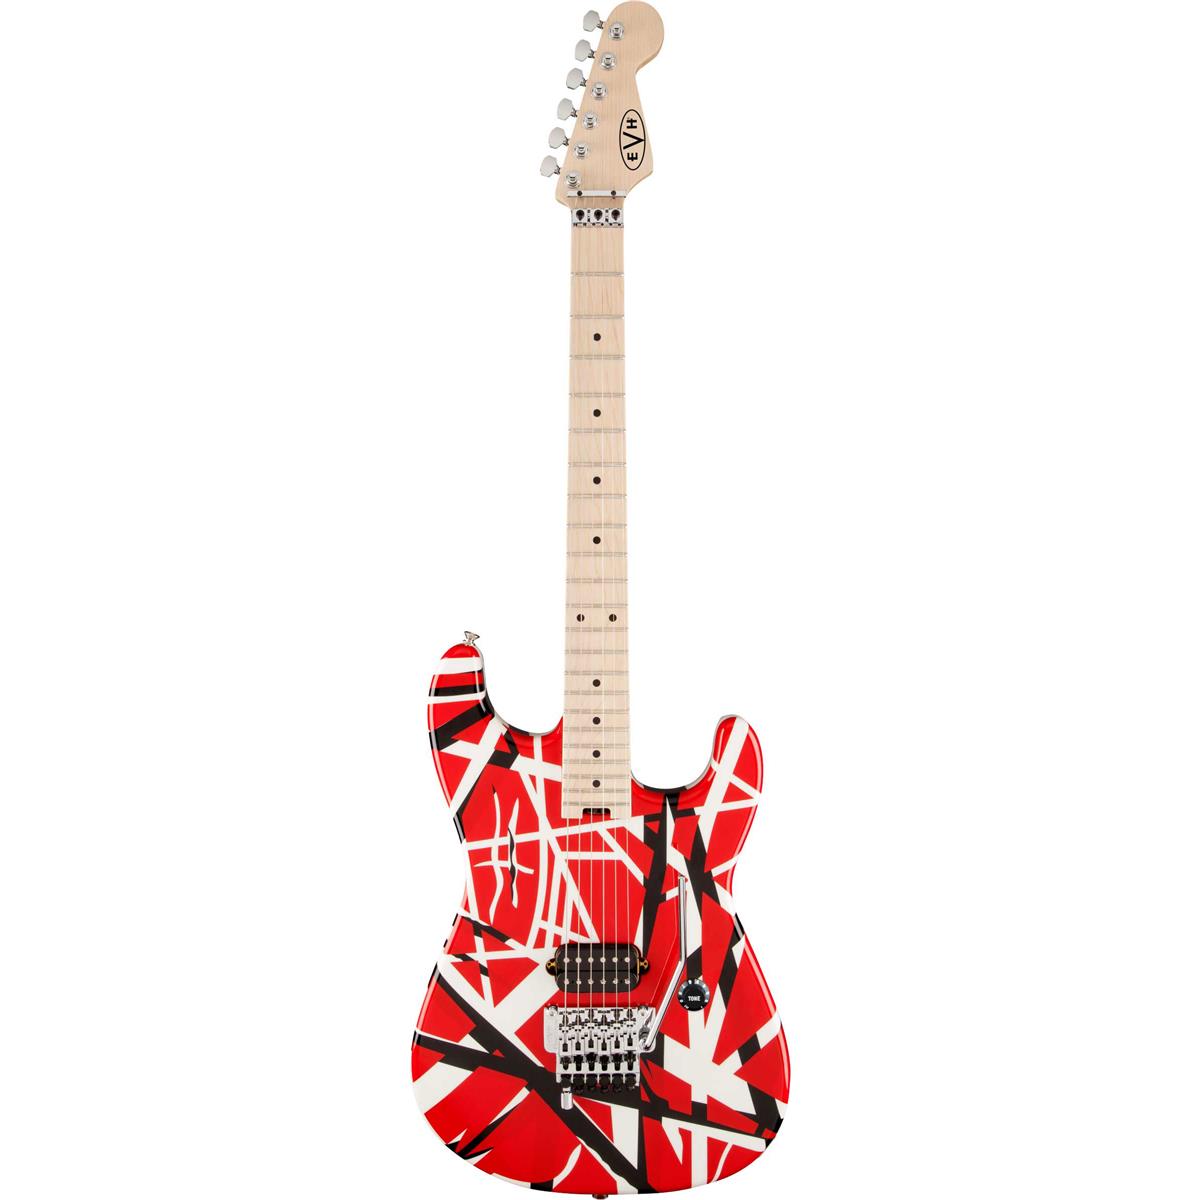 EVH Striped Series Stratocaster Electric Guitar (Red with Black Stripes) $849 + free s/h